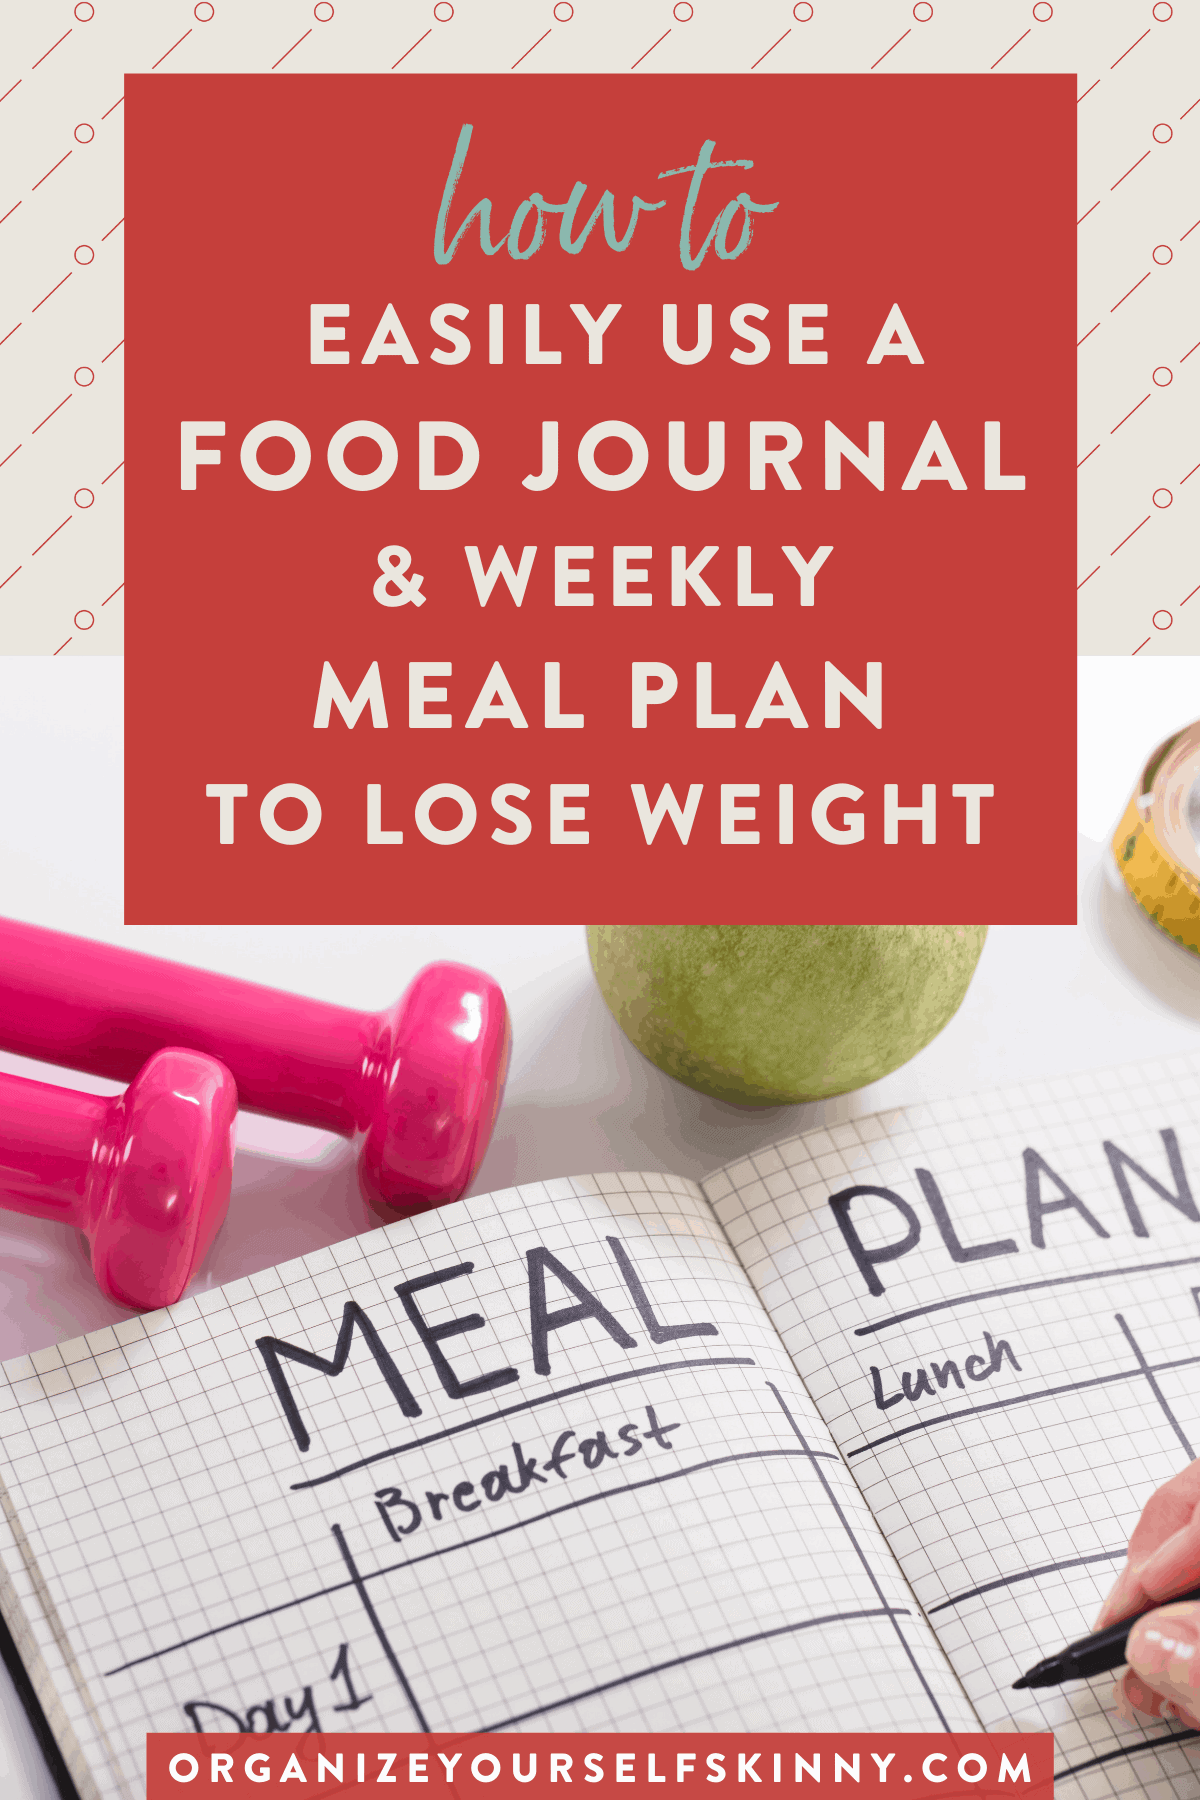 how-to-easily-use-a-food-journal-weekly-meal-plan-to-lose-weight